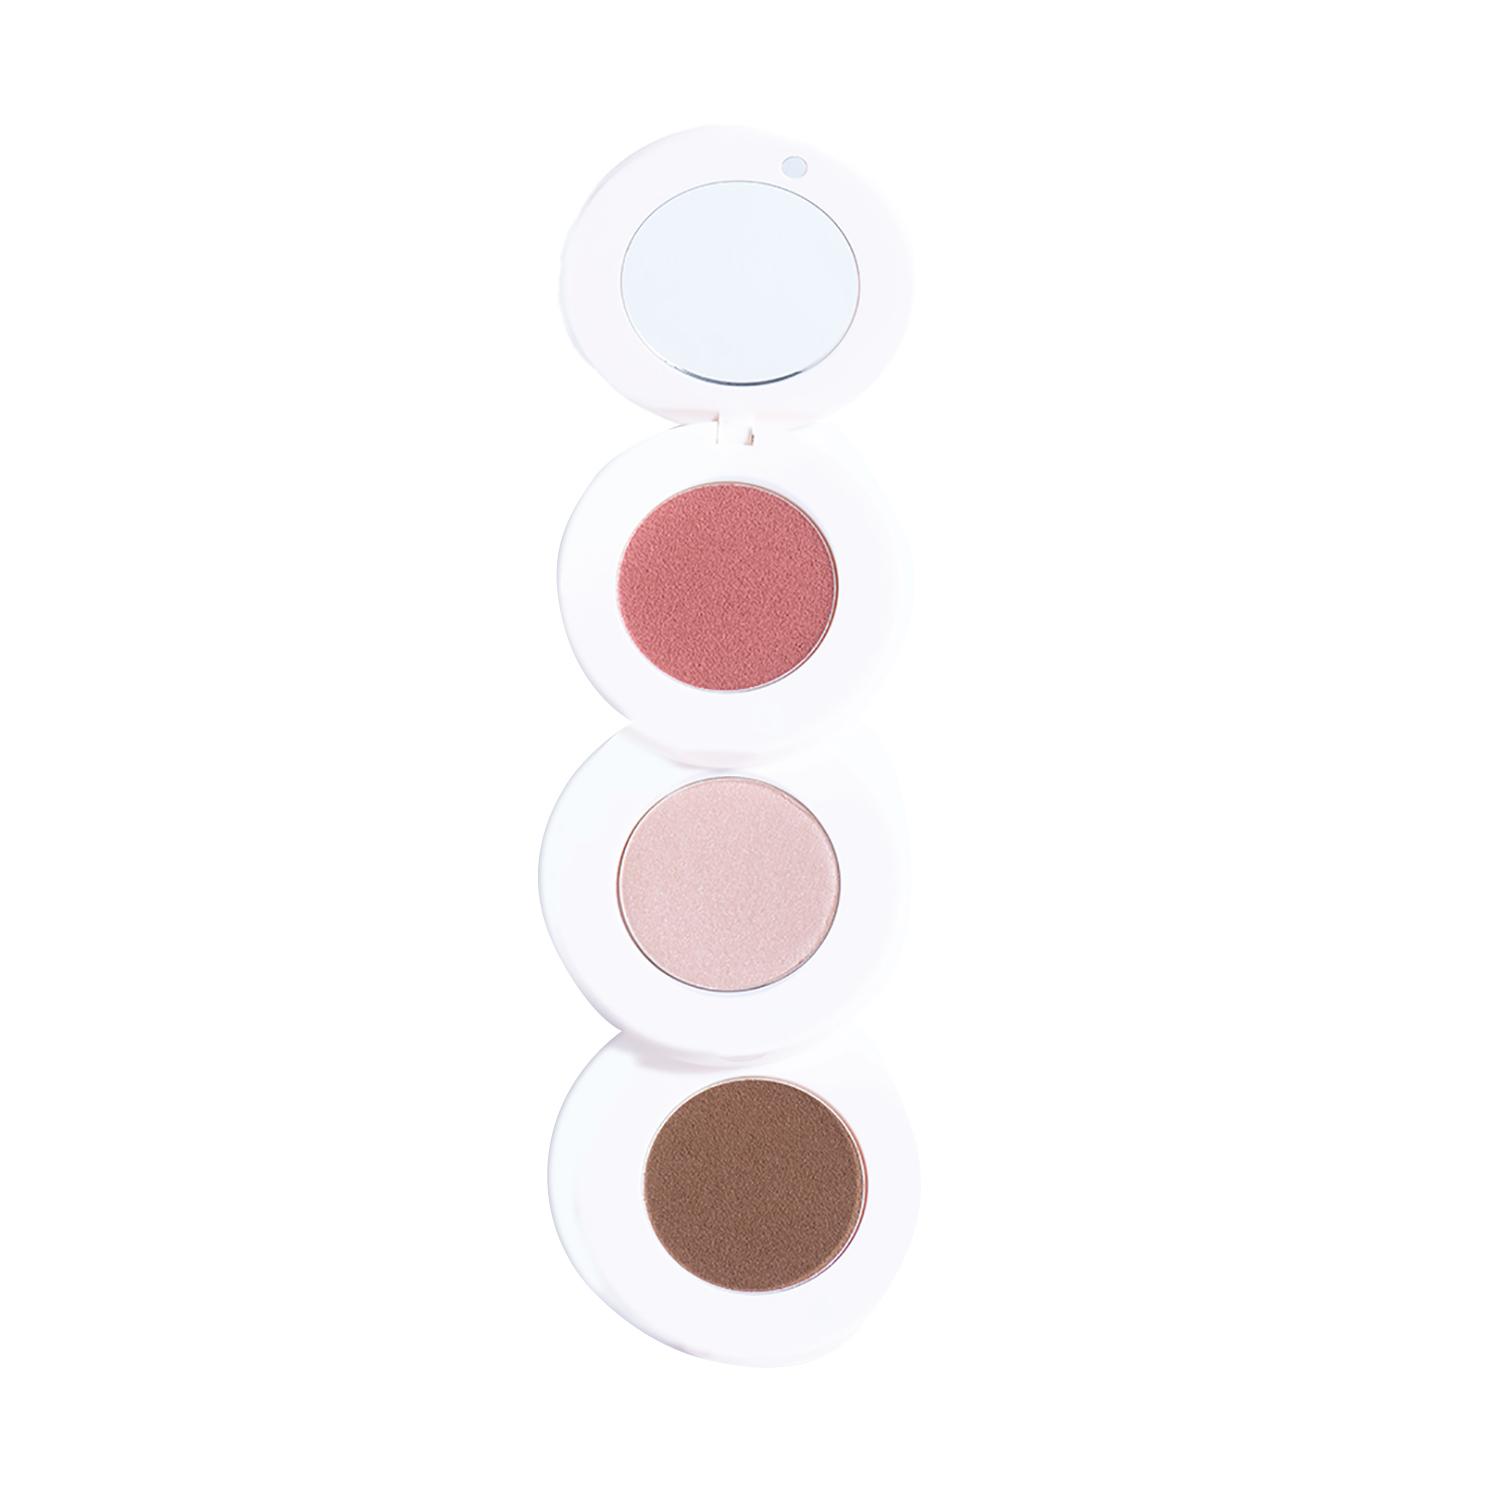 Gush Beauty | Gush Beauty Stacked In Your Favour Multi-Purpose Face Palette - Weekdays To Weekend (6.9g)